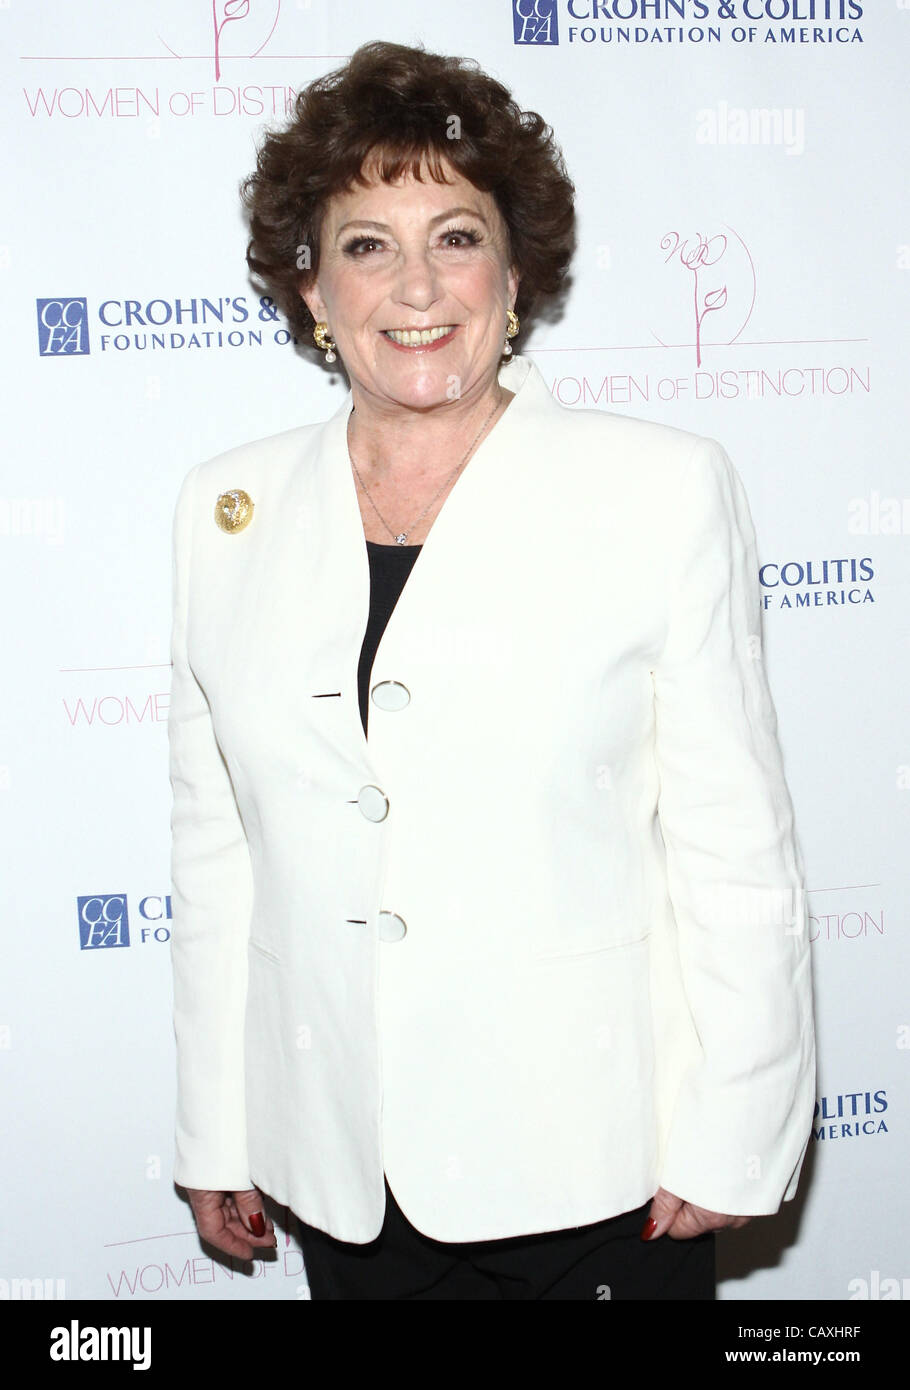 May 3, 2012 - Los Angeles, California, U.S. - Barbara Herman attends Fifth  Annual Women of Distinction Luncheon held at the The Beverly Hills Hotel,  Beverly Hills,CA. May 3 - 2012.(Credit Image: